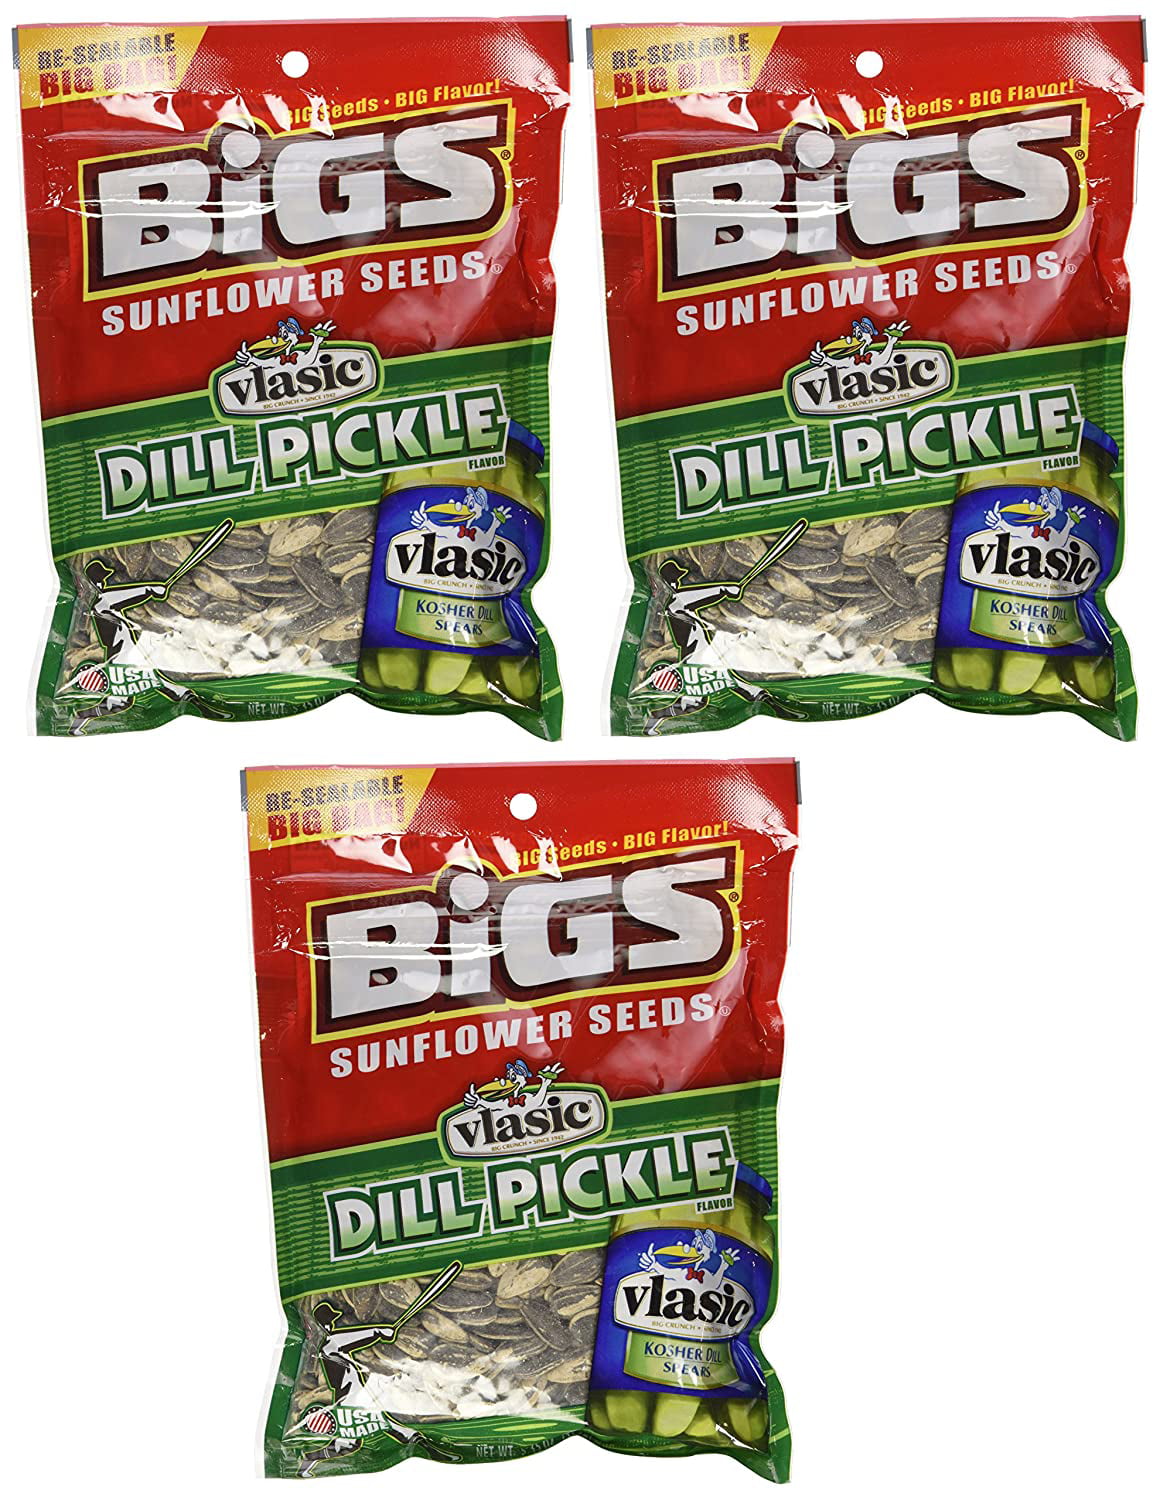 Bigs Dill Pickle Sunflower Seeds 5 35. 